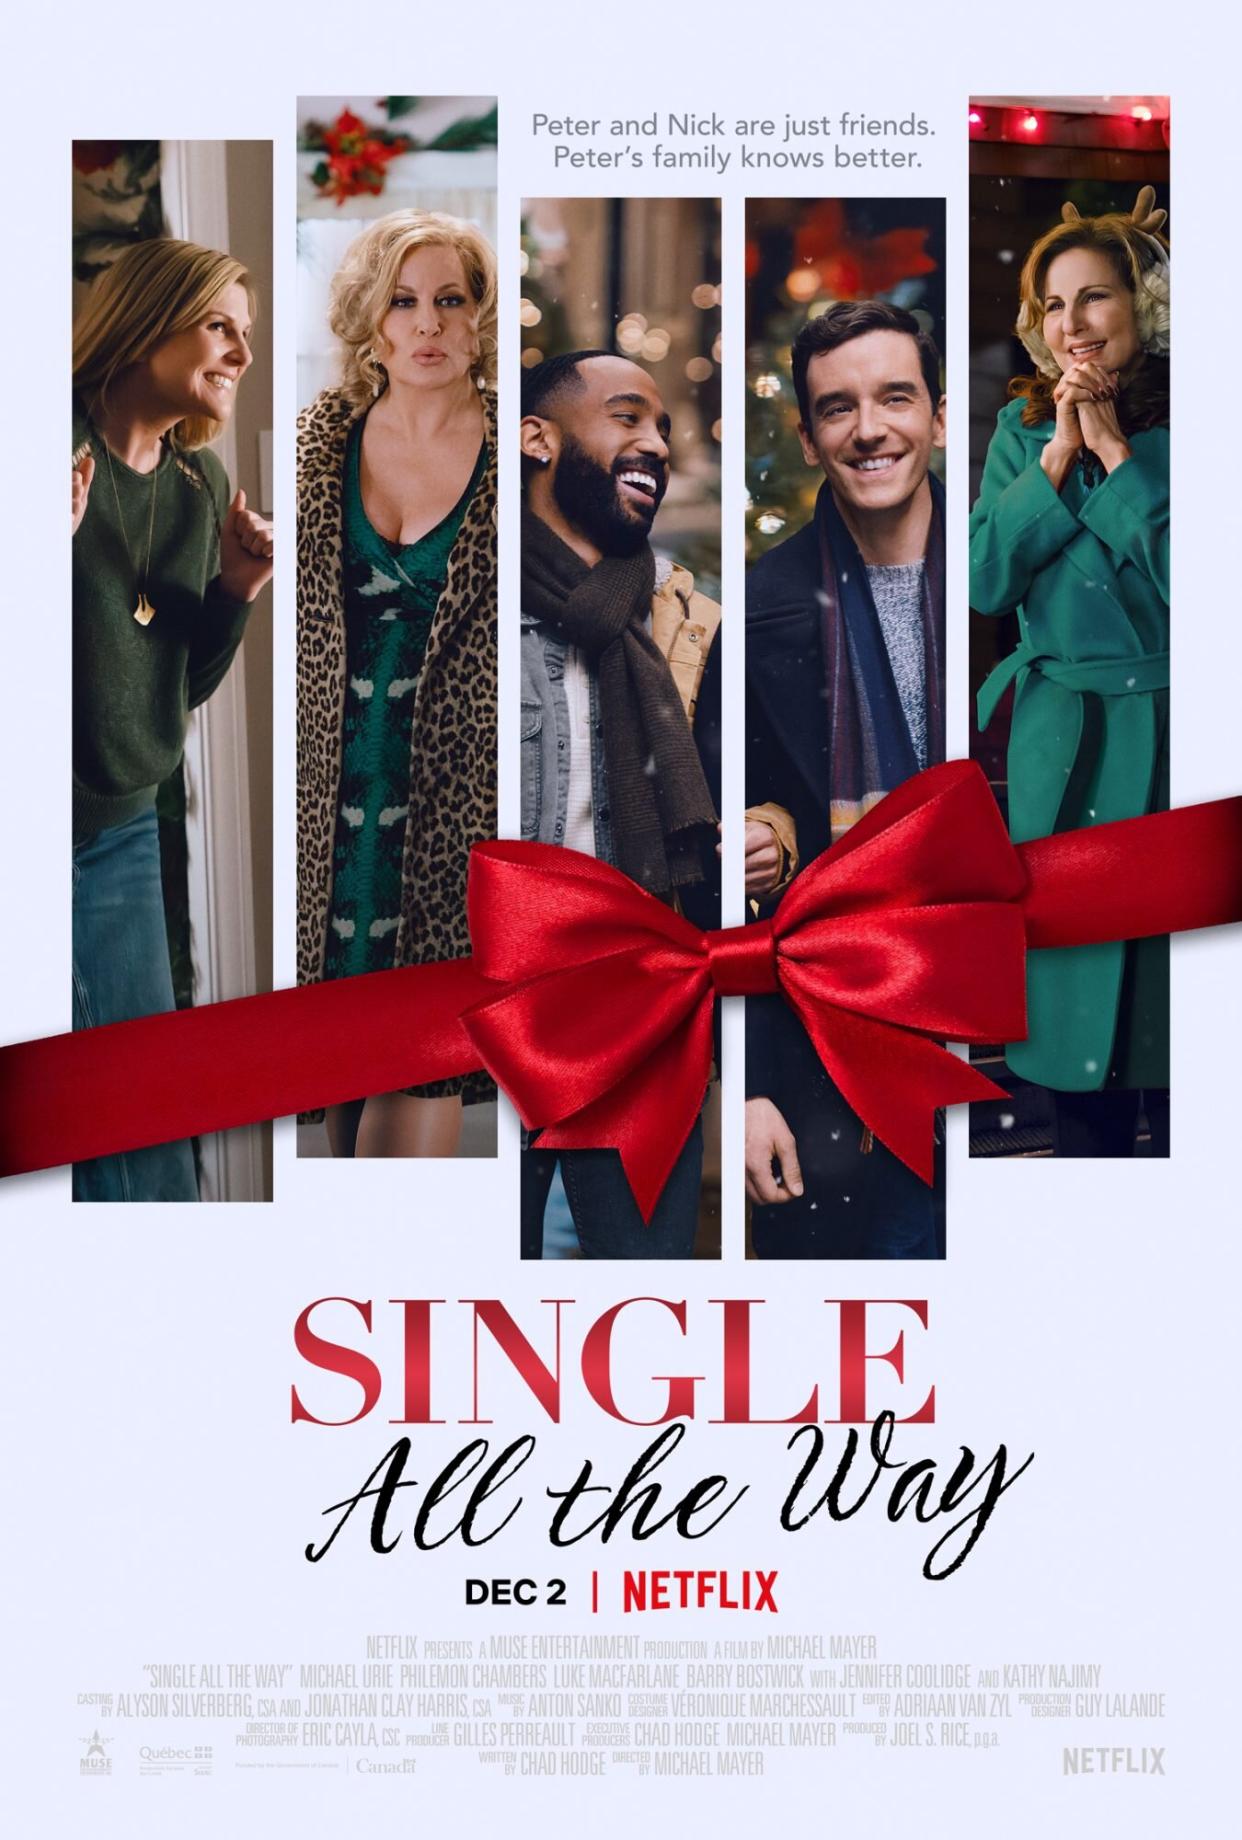 Single All the Way Is the Netflix Holiday Rom-Com We Deserve